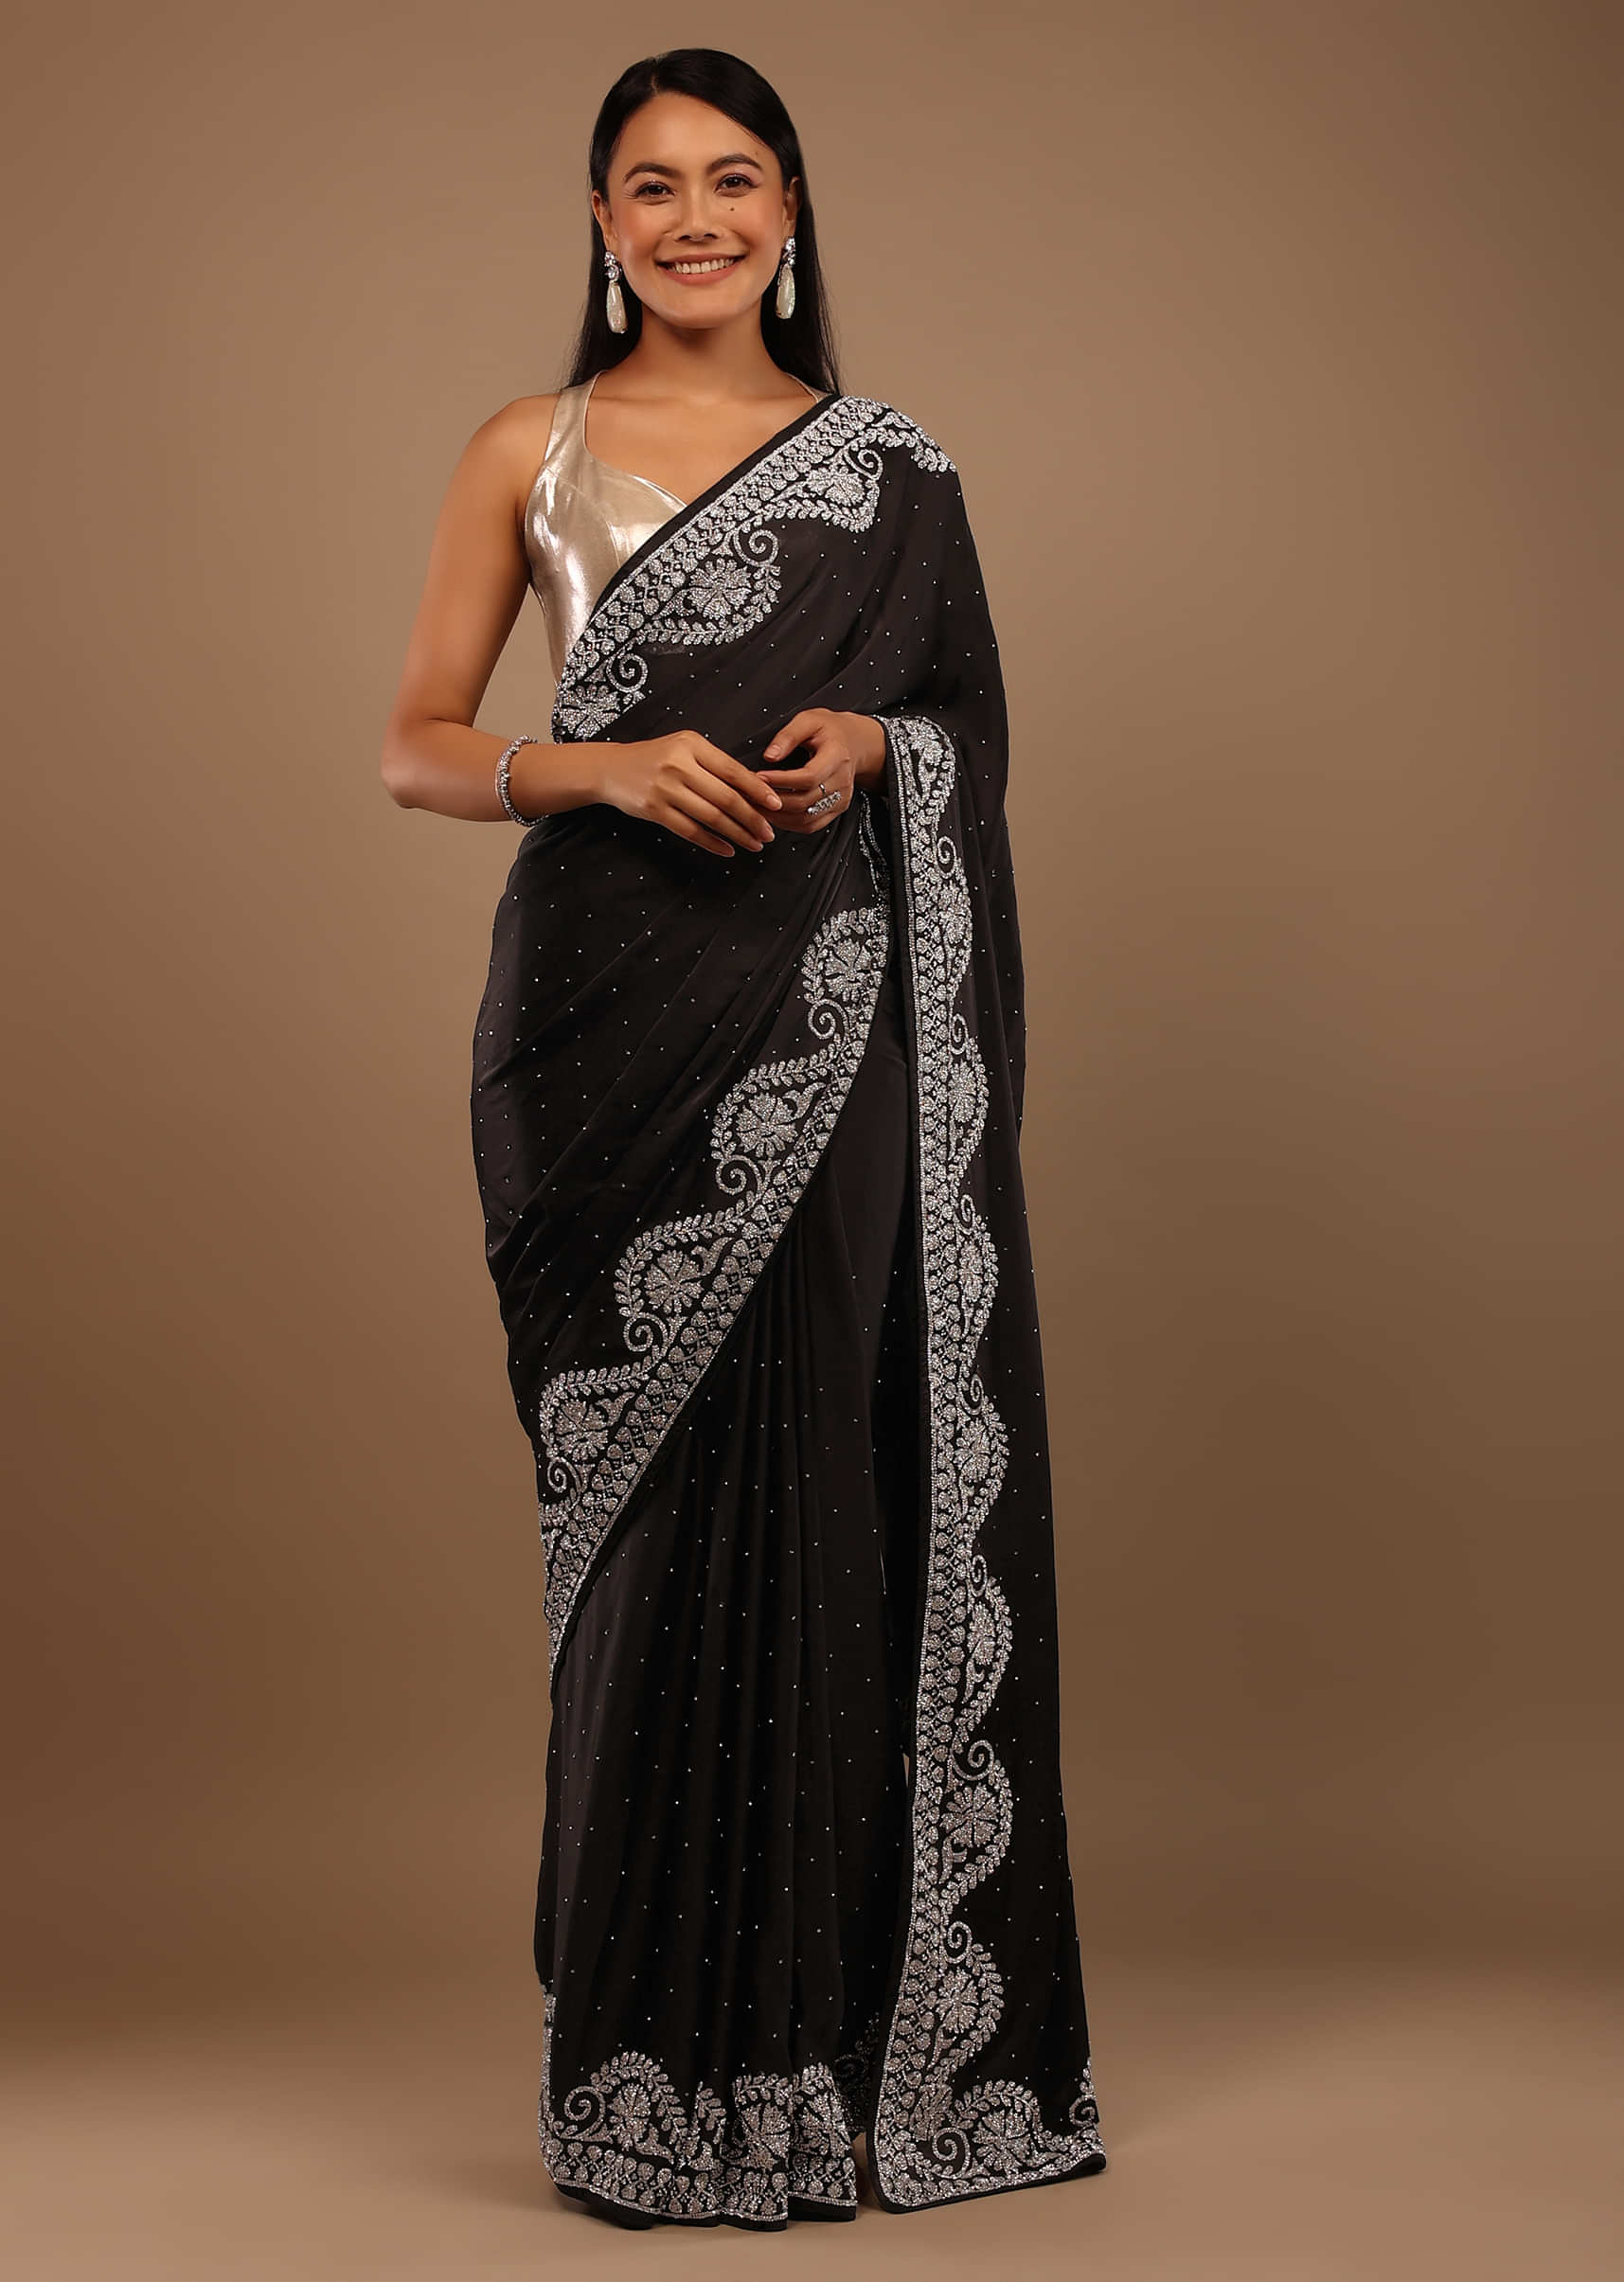 Black Georgette Saree With An Unstitched Blouse ANd Beautified Using Swarovski Stonework On The Border 